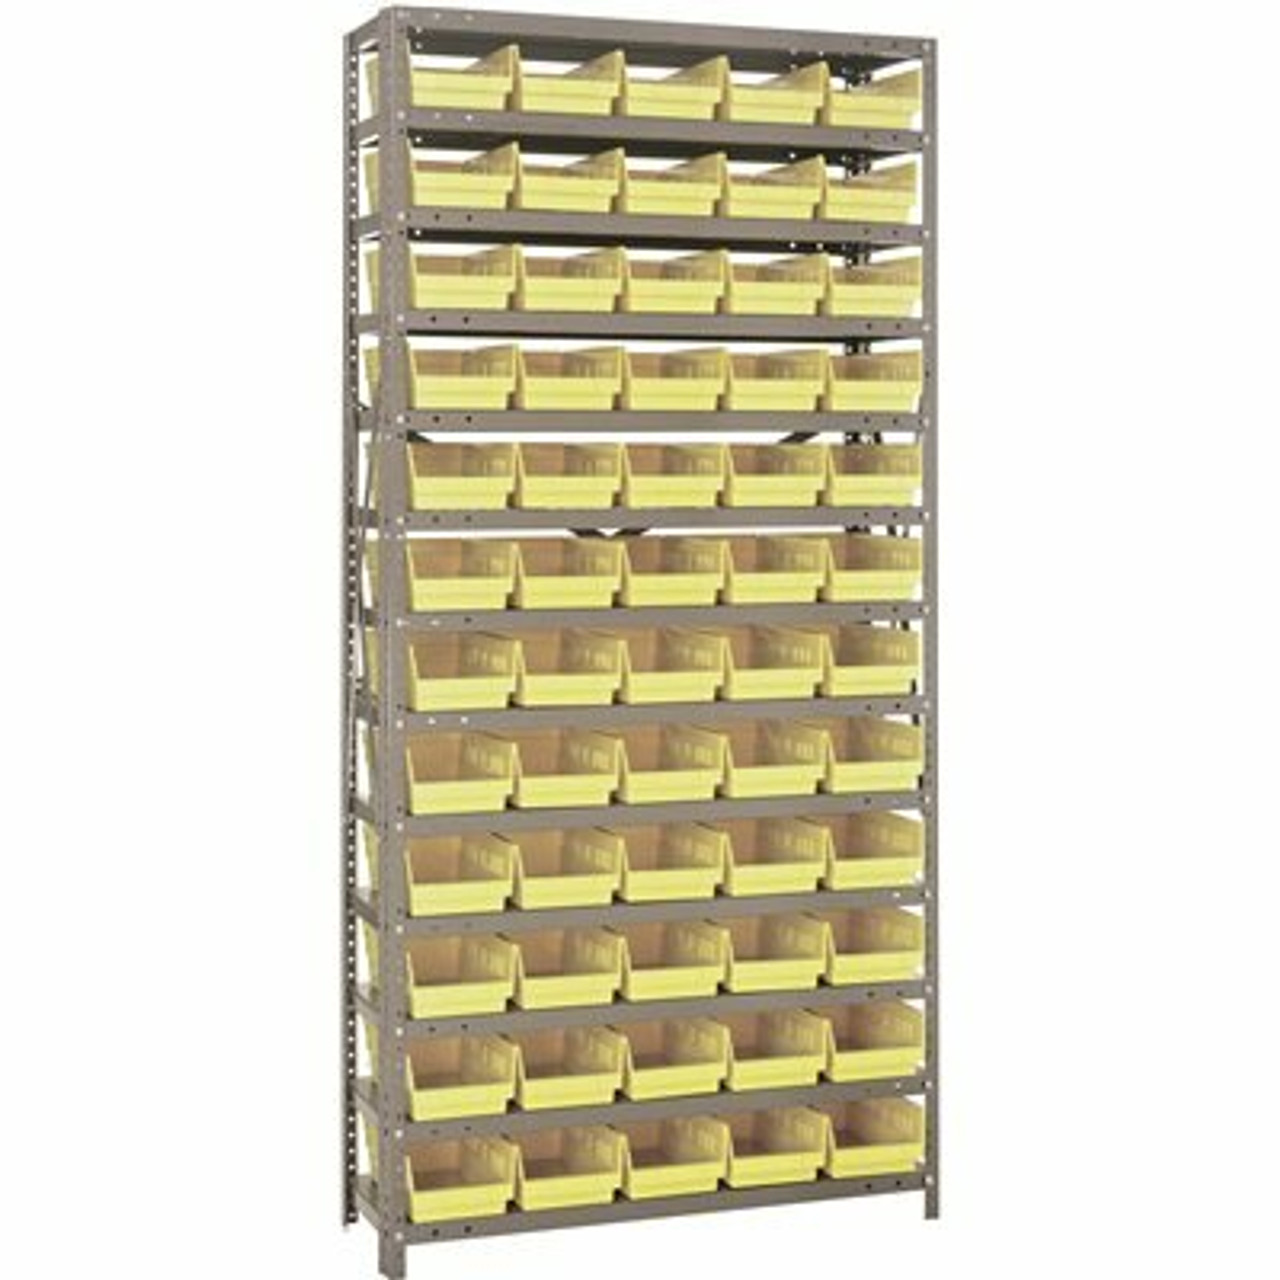 1275-101Yl Economy 4 In. Shelf Bin 12 In. X 36 In. X 75 In. 13-Tier Shelving System Complete With Qsb102 Yellow Bins